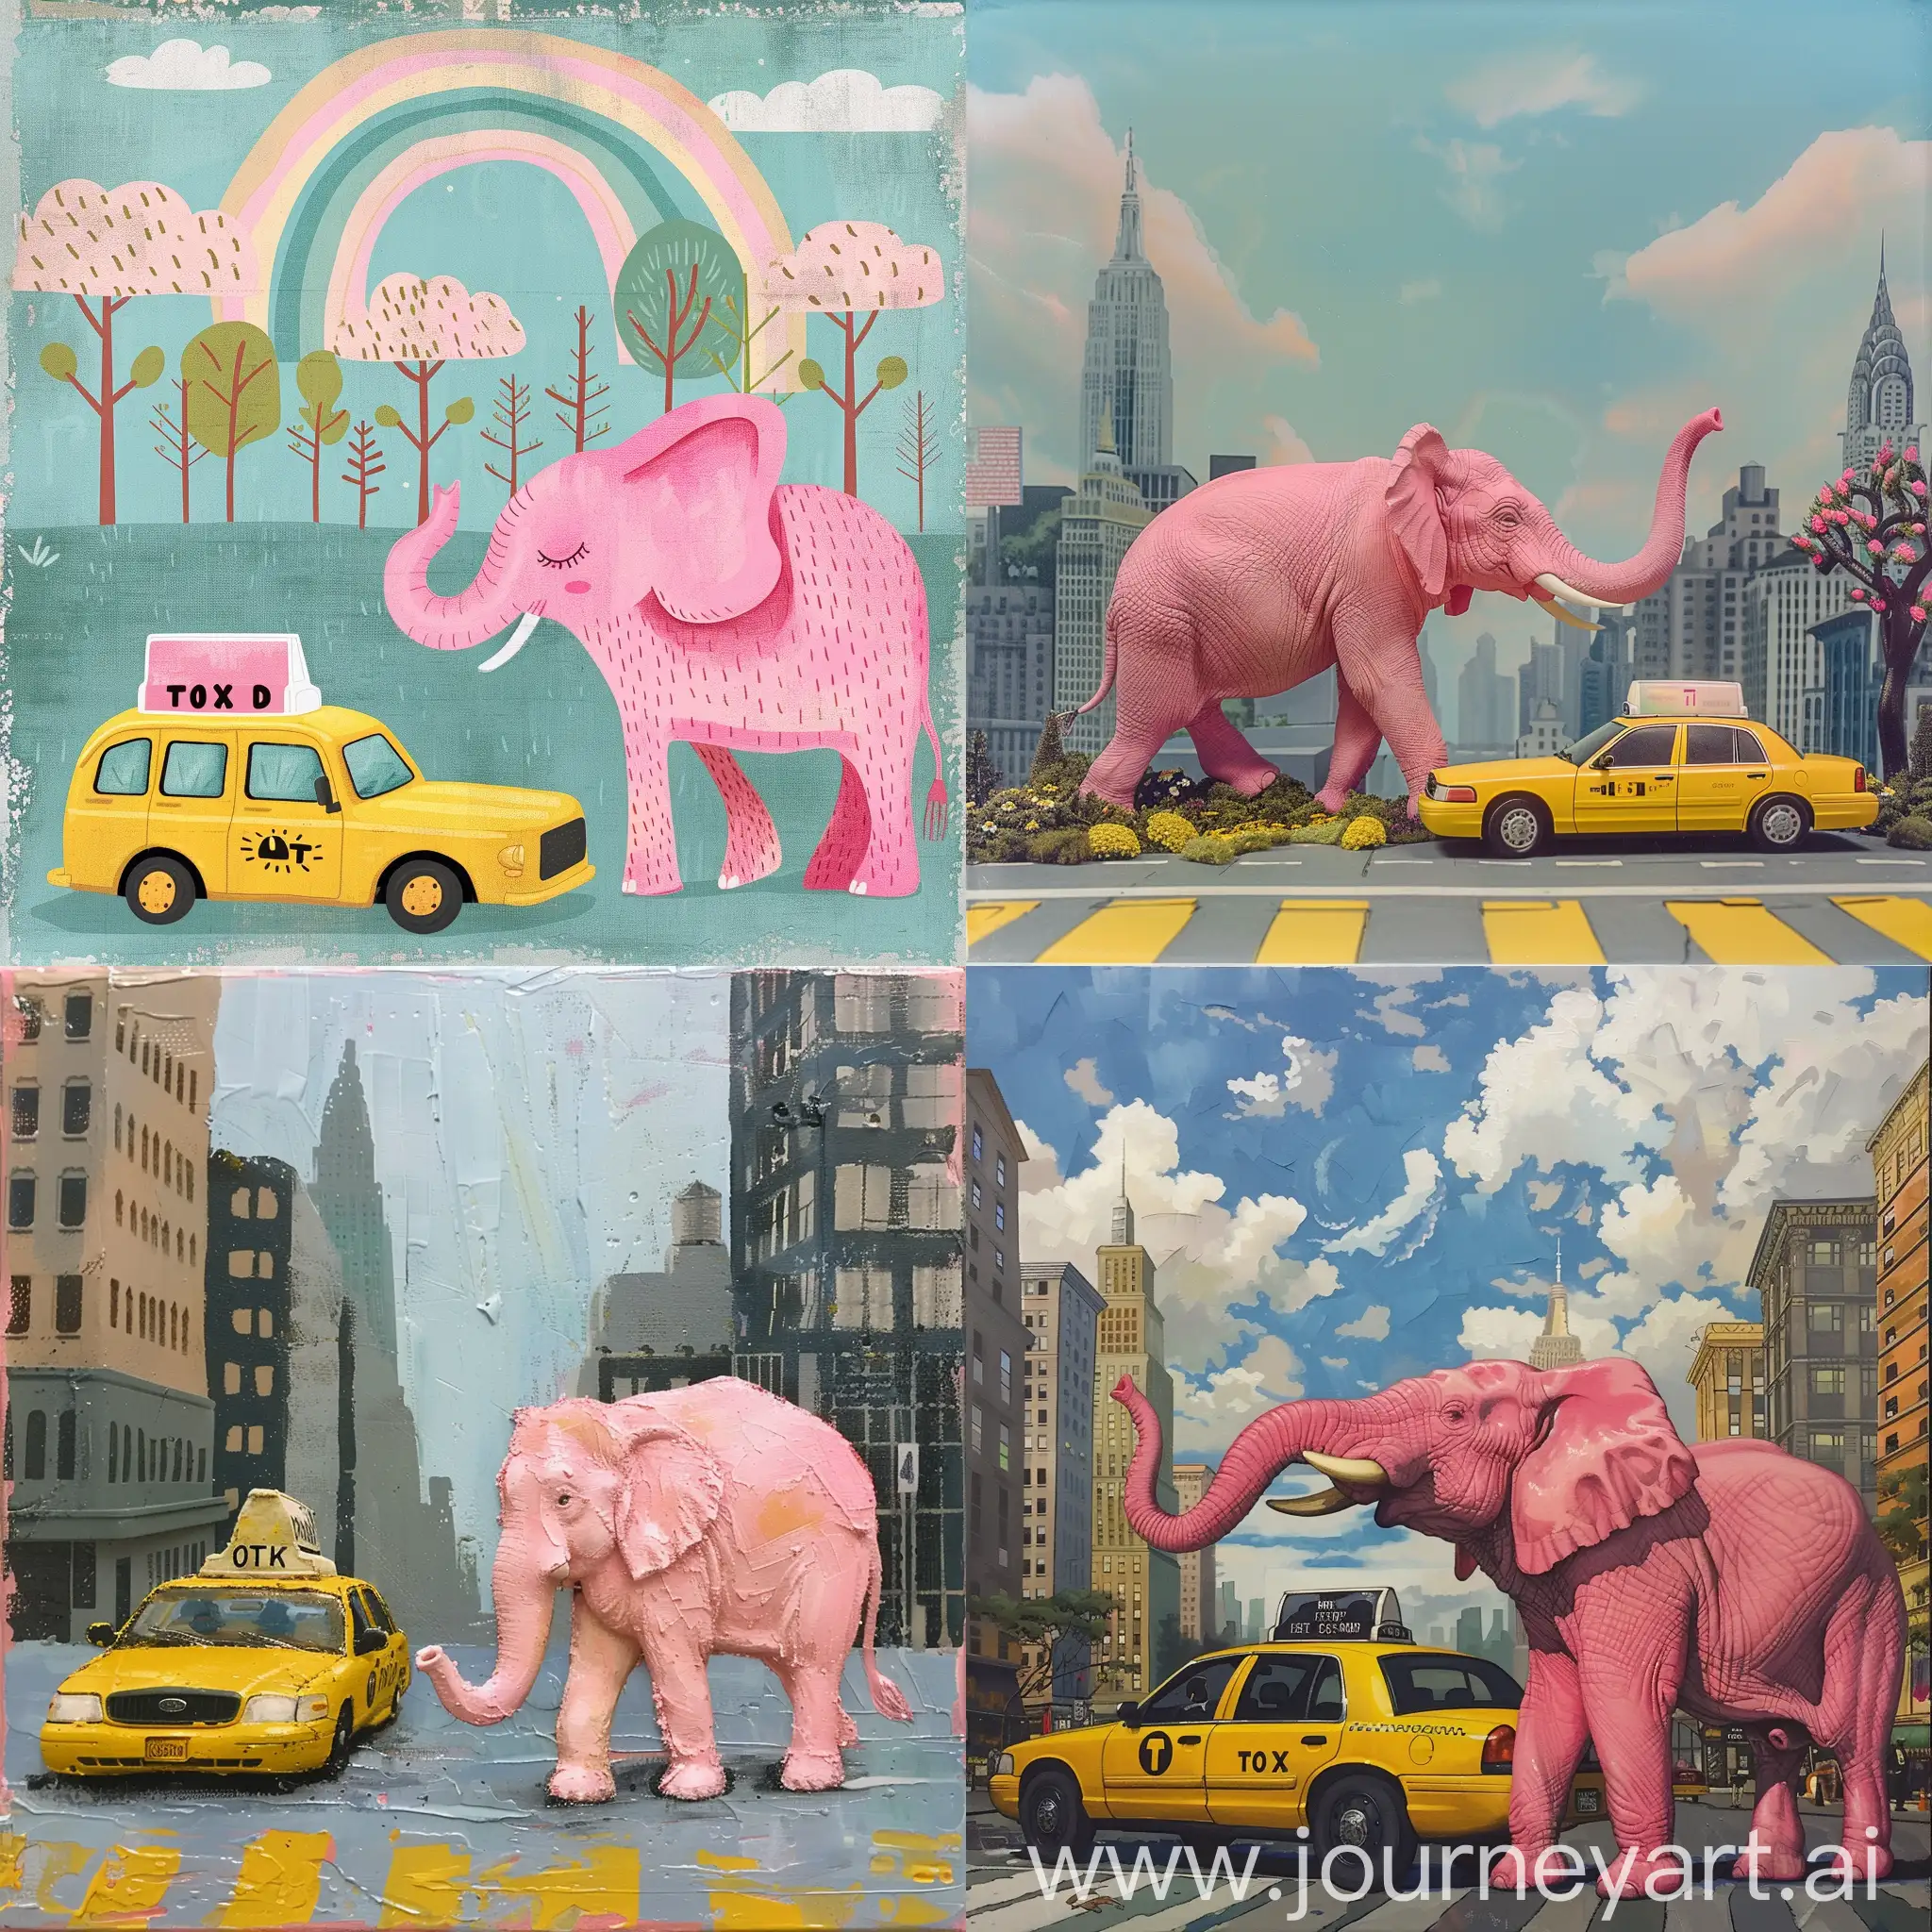 Vibrant-Pink-Elephant-and-Yellow-Taxi-in-Urban-Landscape